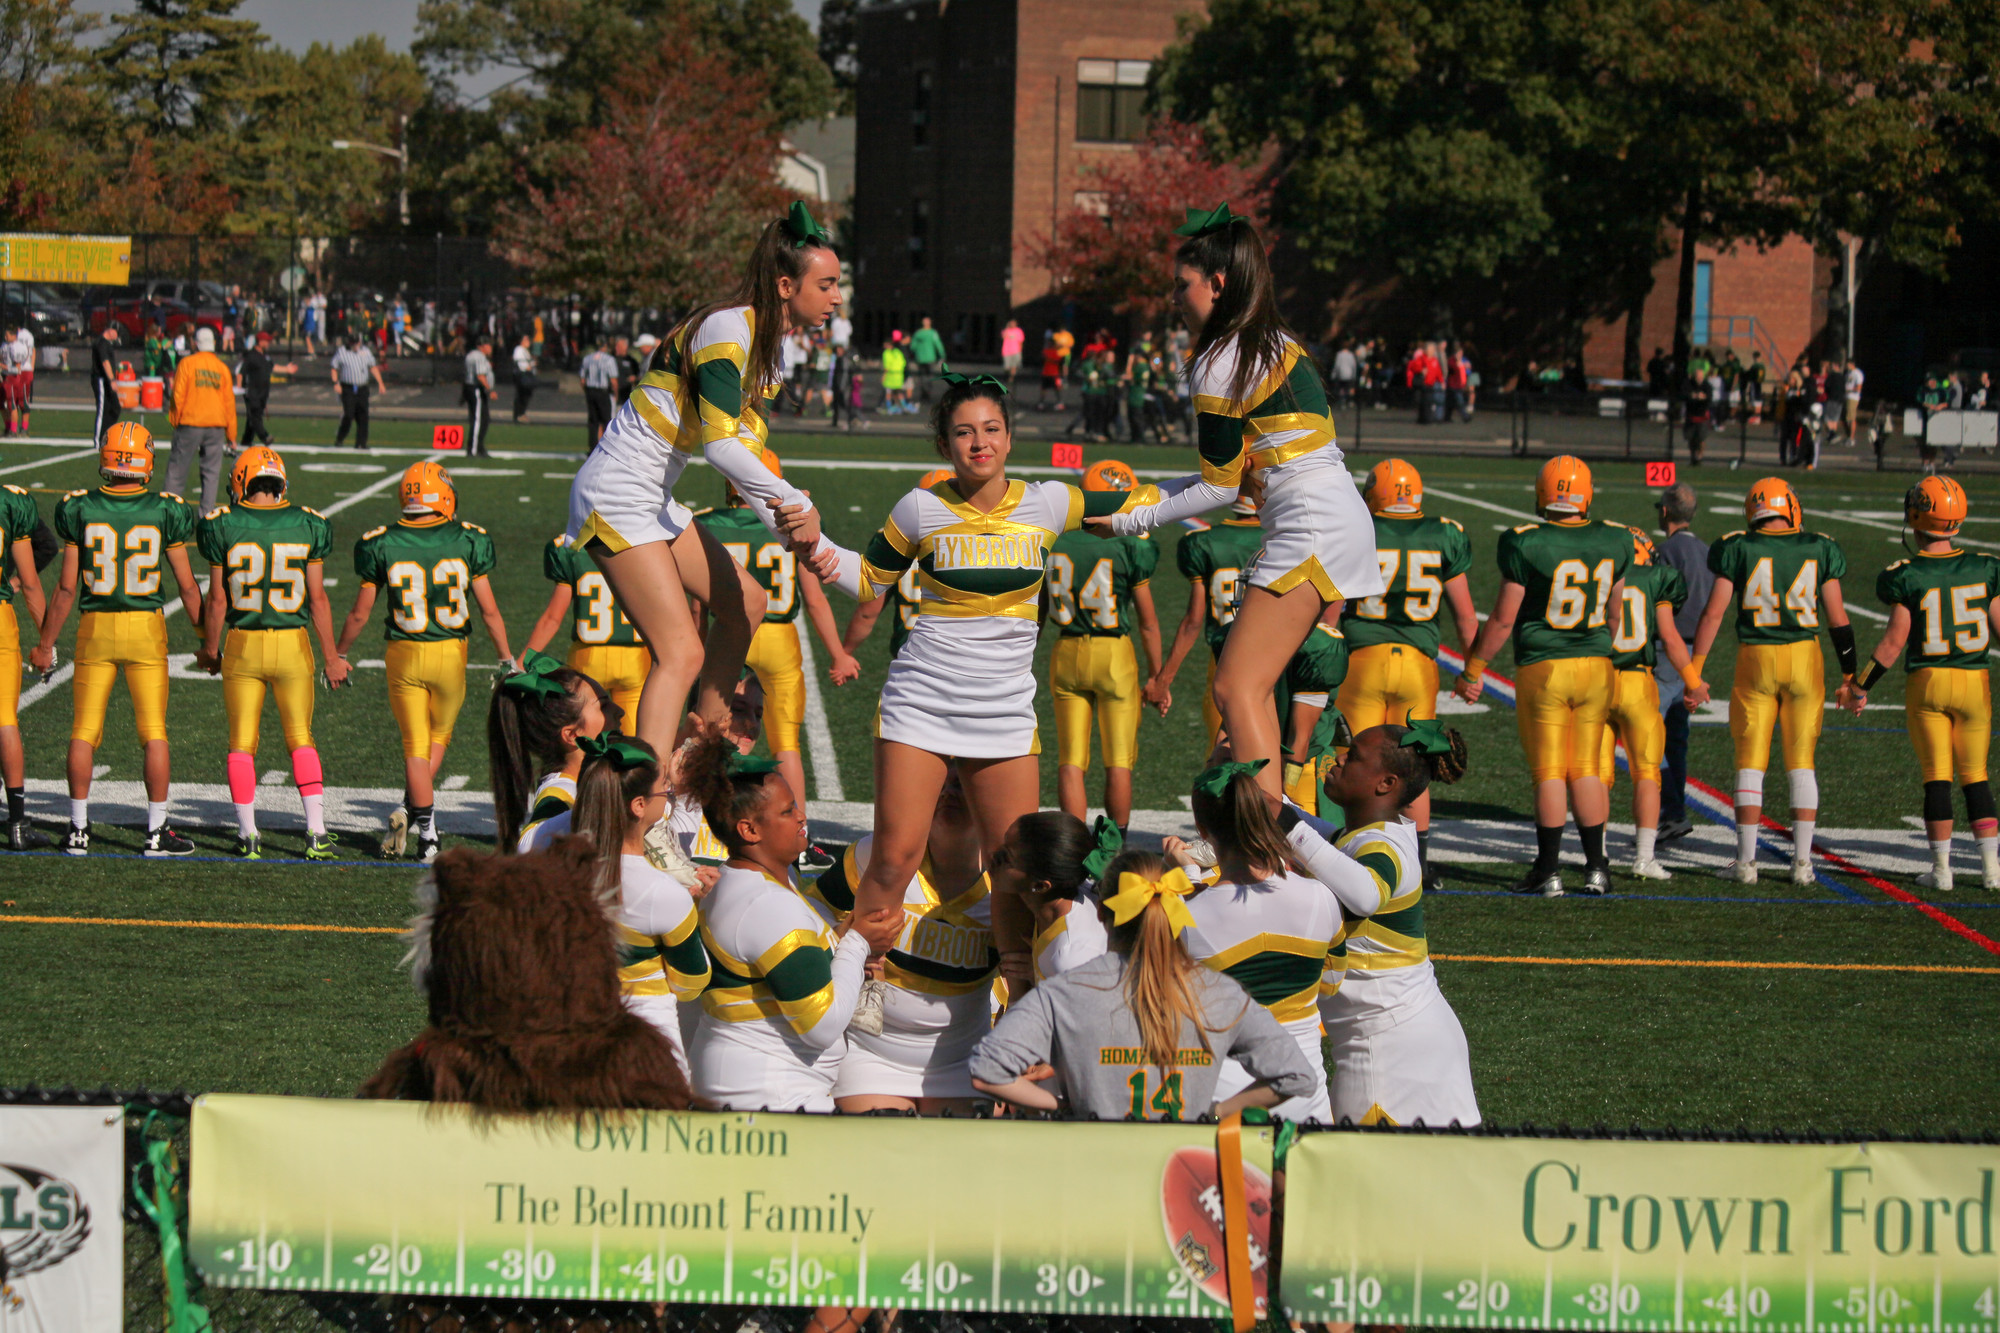 The Lynbrook High School cheerleaders perform for the crowd before the start of the game.